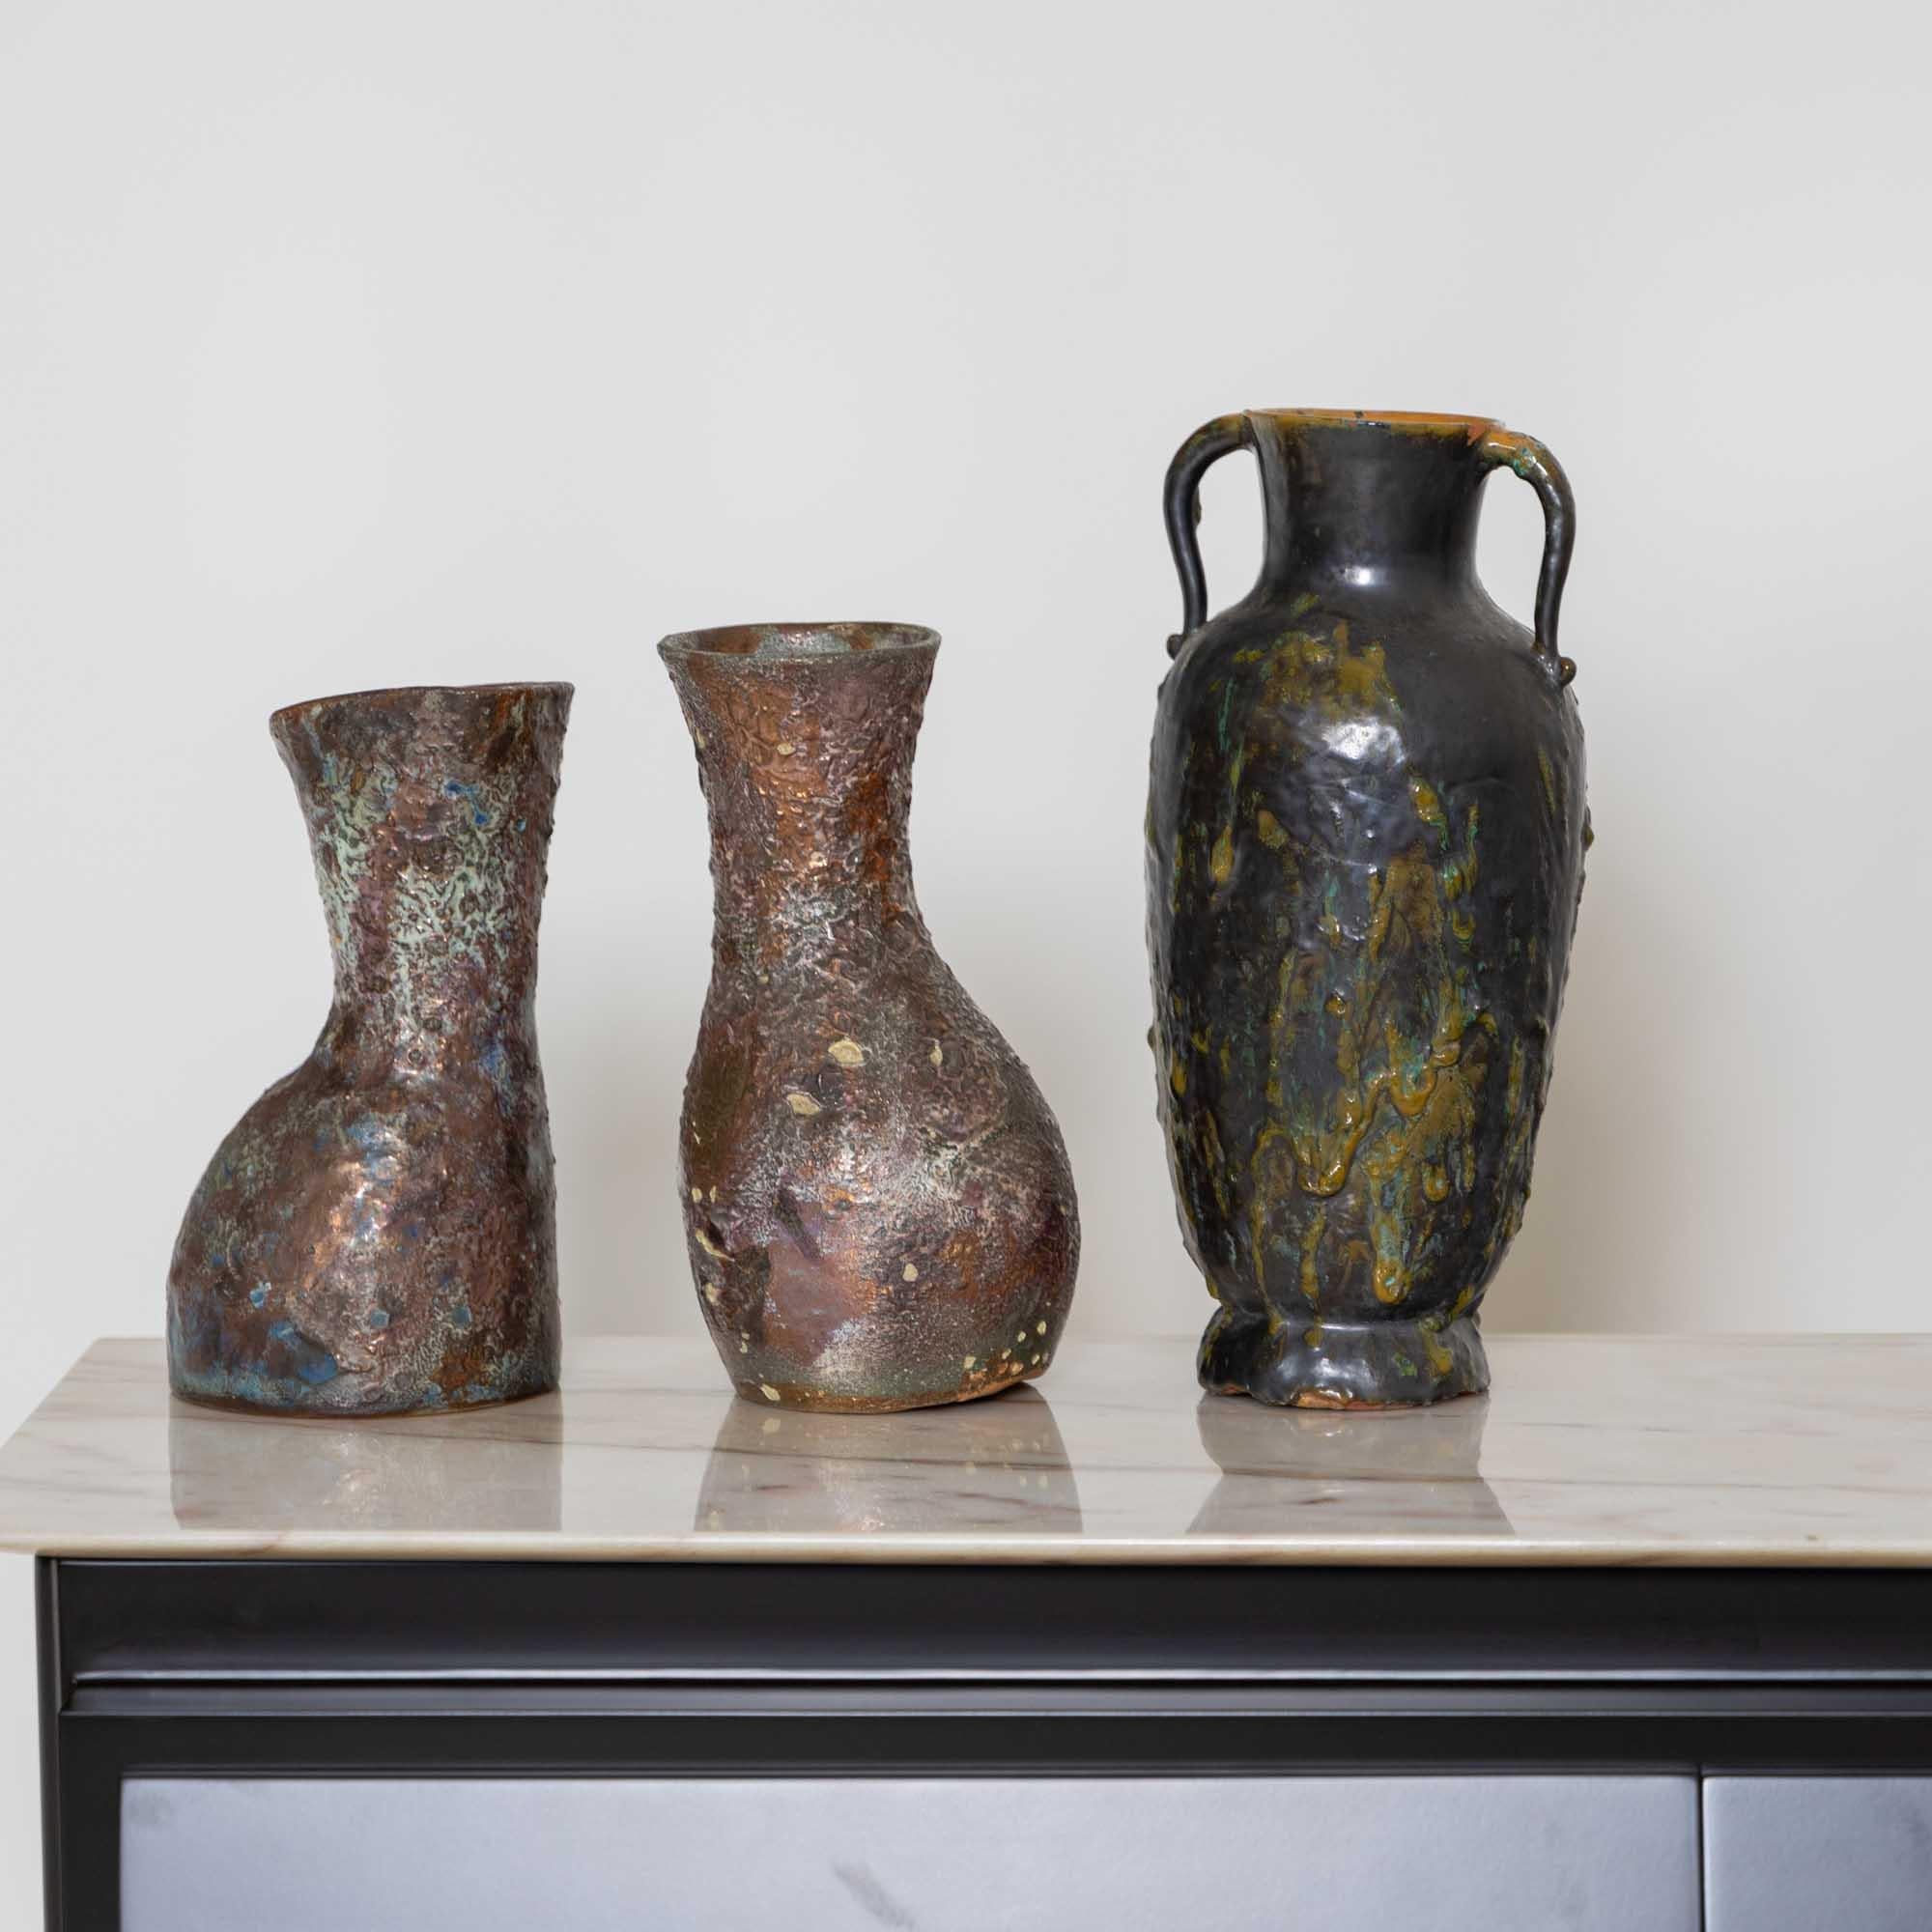 Glazed Four Brutalist Ceramic Vases by Nereo Boaretto, Italy 1950s For Sale